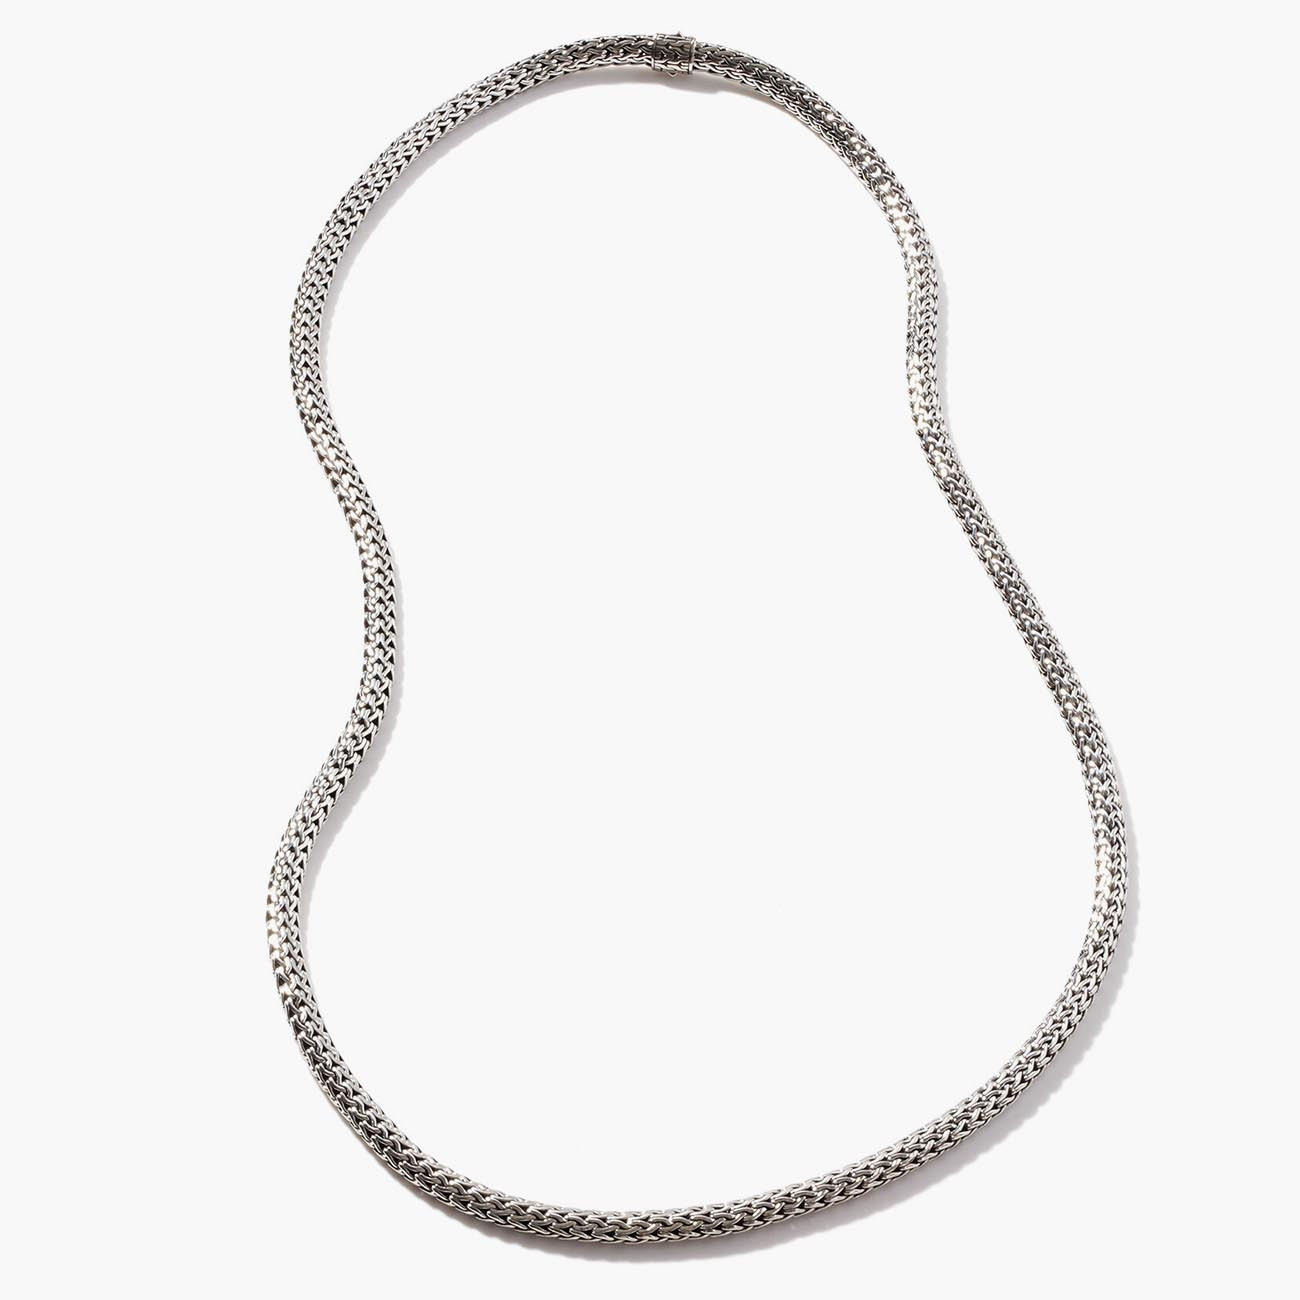 John Hardy 7.45mm Classic Chain Silver Necklace closed